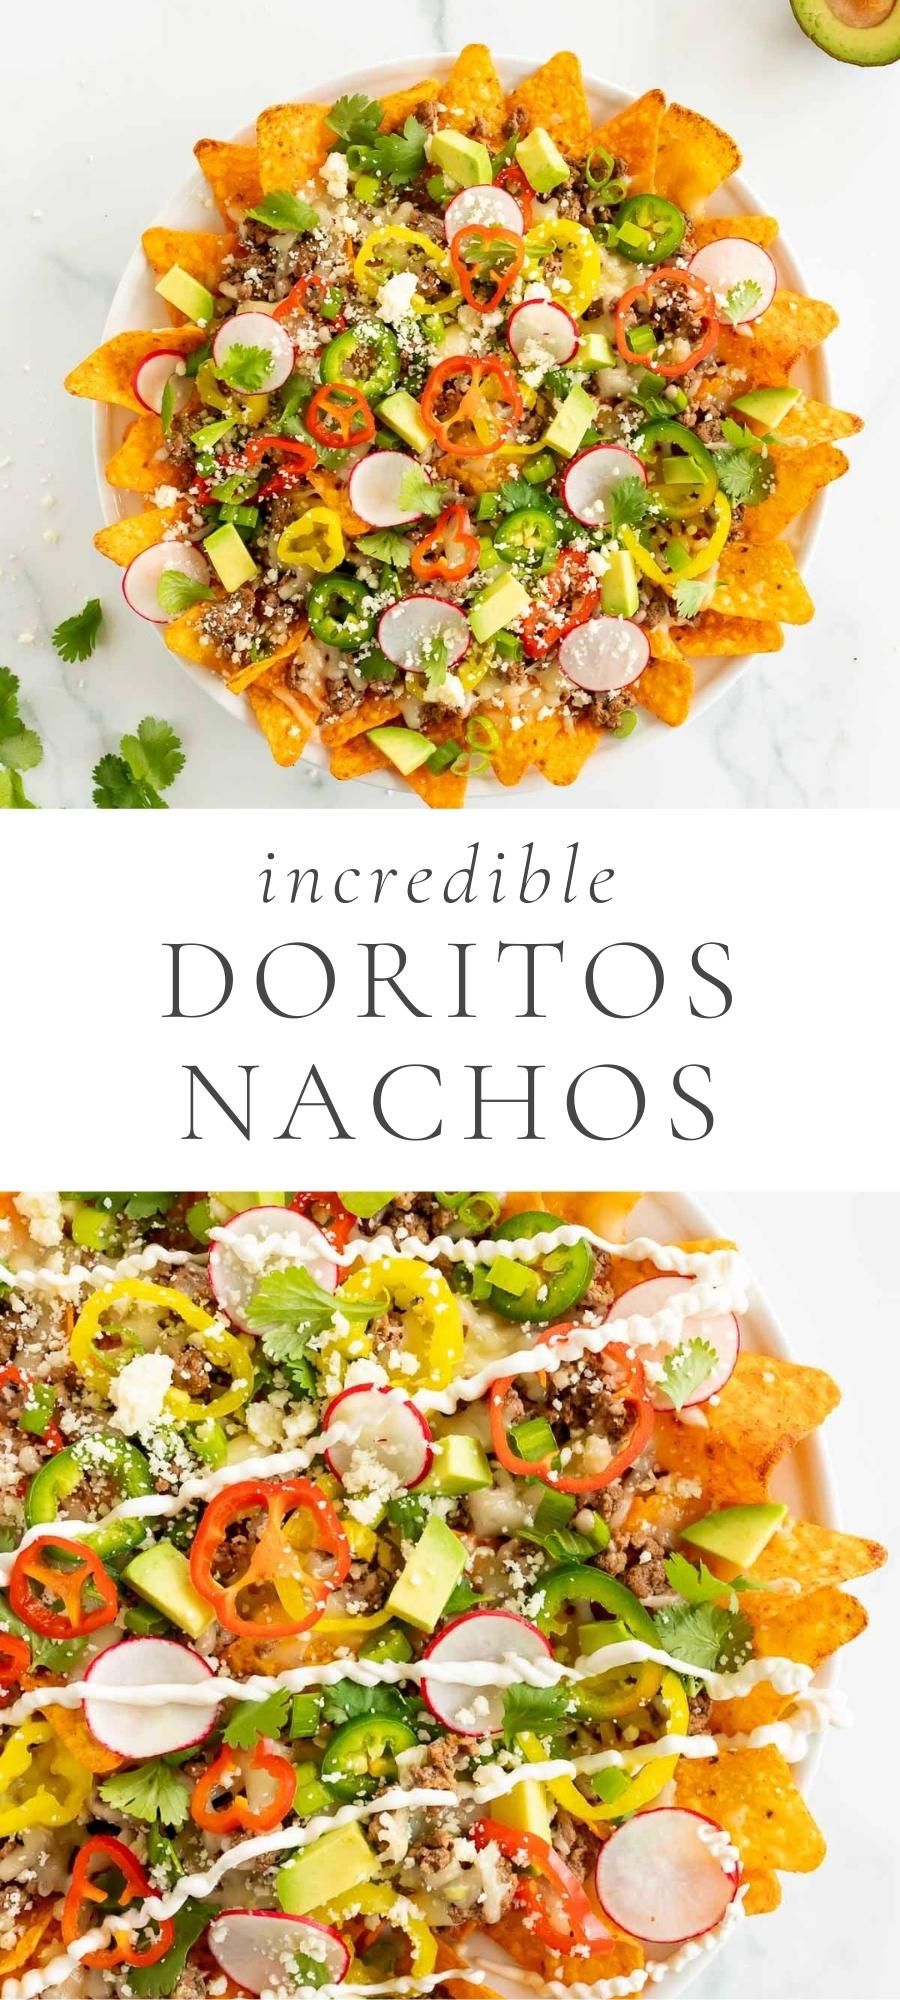 doritos nachos with cheese meat and vegetables on plate